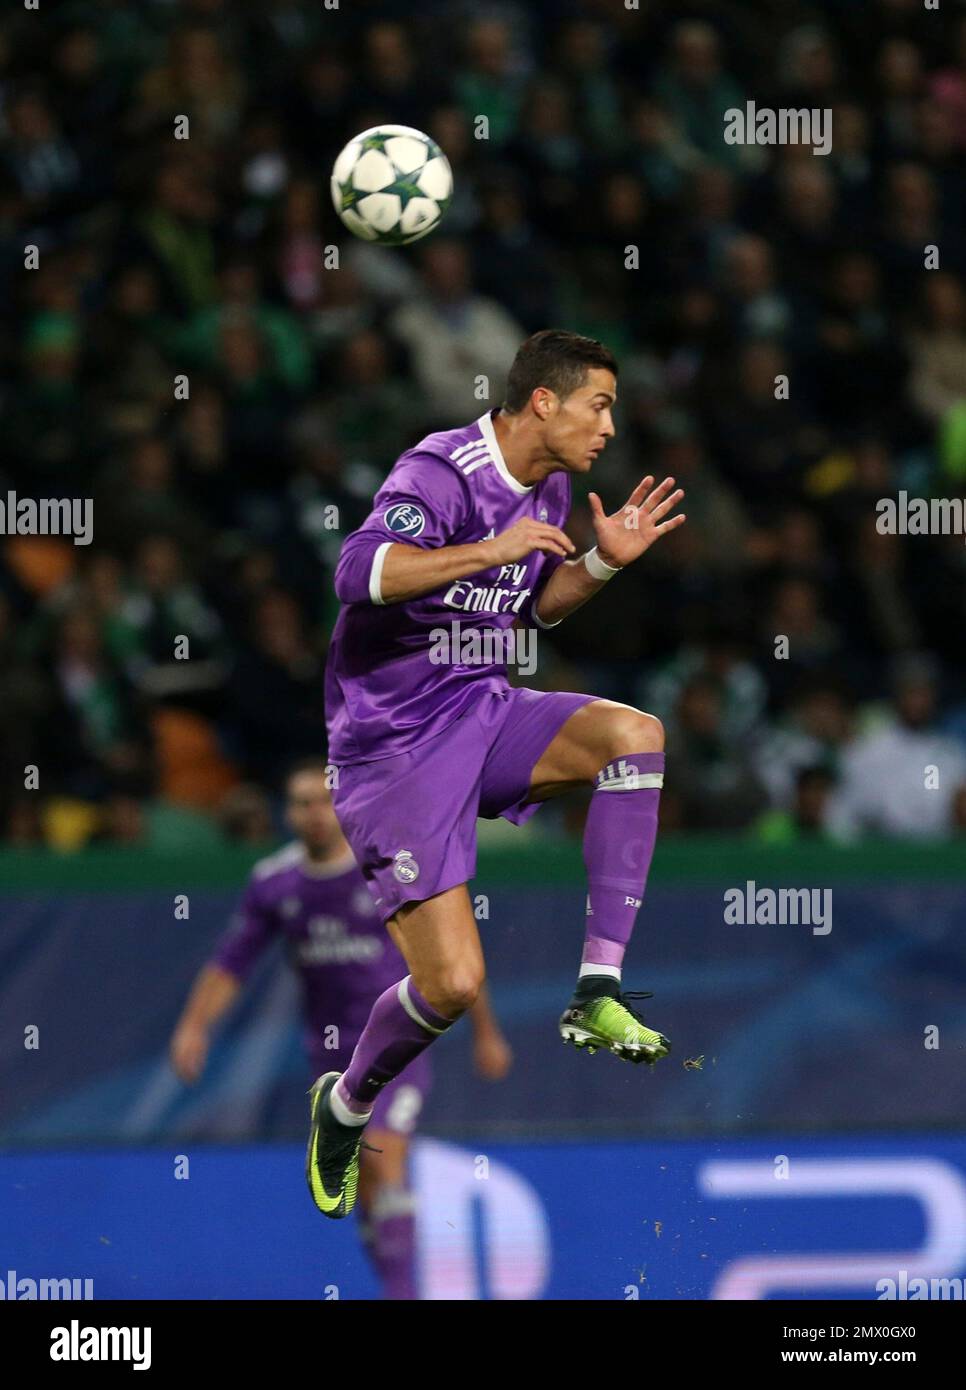 Real Madrid's Cristiano Ronaldo heads the ball during the Champions League  Group F soccer match between Sporting CP and Real Madrid at the Alvalade  stadium in Lisbon, Tuesday, Nov. 22, 2016. (AP